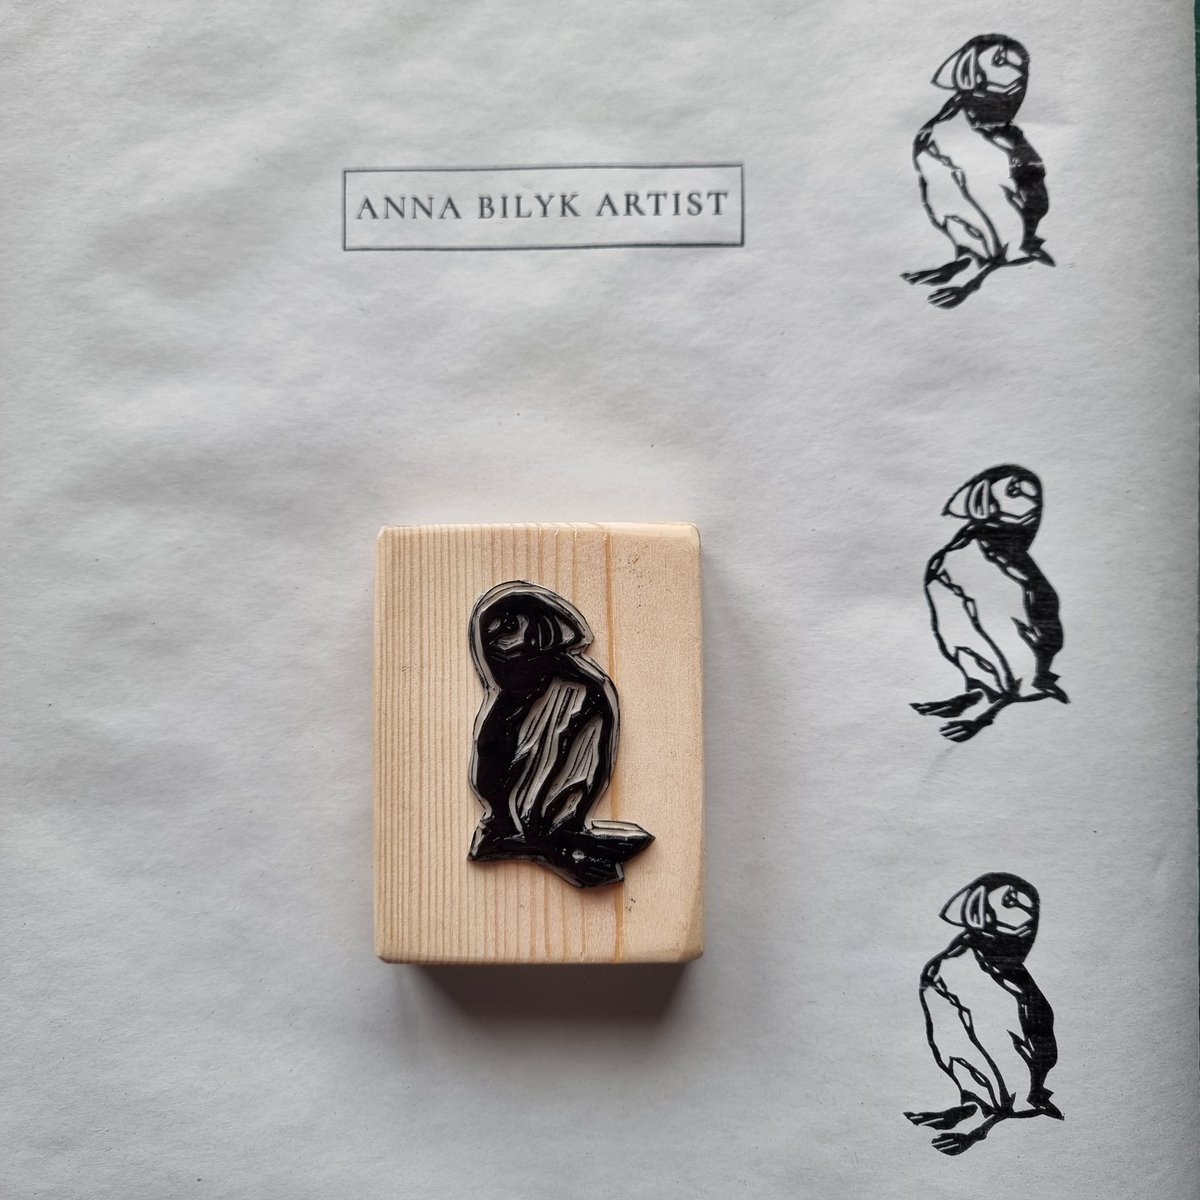 Morning #earlybiz I've been enjoying a wee break away this weekend - shops still open for your lino stamps!!! Seabirds are the fav at the moment !!!
annabilykartist.etsy.com 
#shopindie #ukgiftam #UKGiftHour #craft #stampart #stamp #scrapbooking #journaling #etsyshop